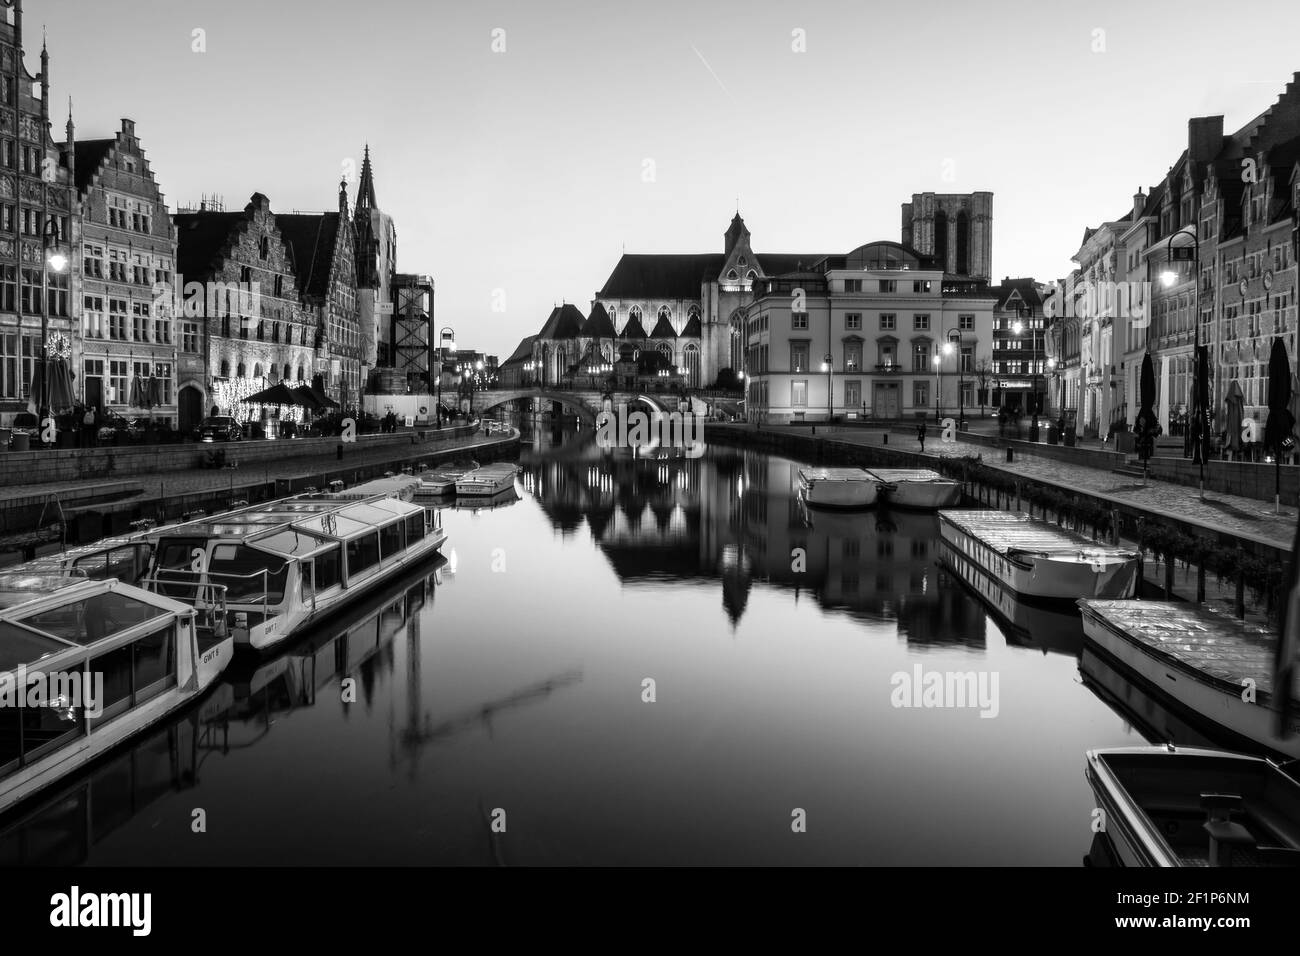 In ghent Black and White Stock Photos & Images - Alamy